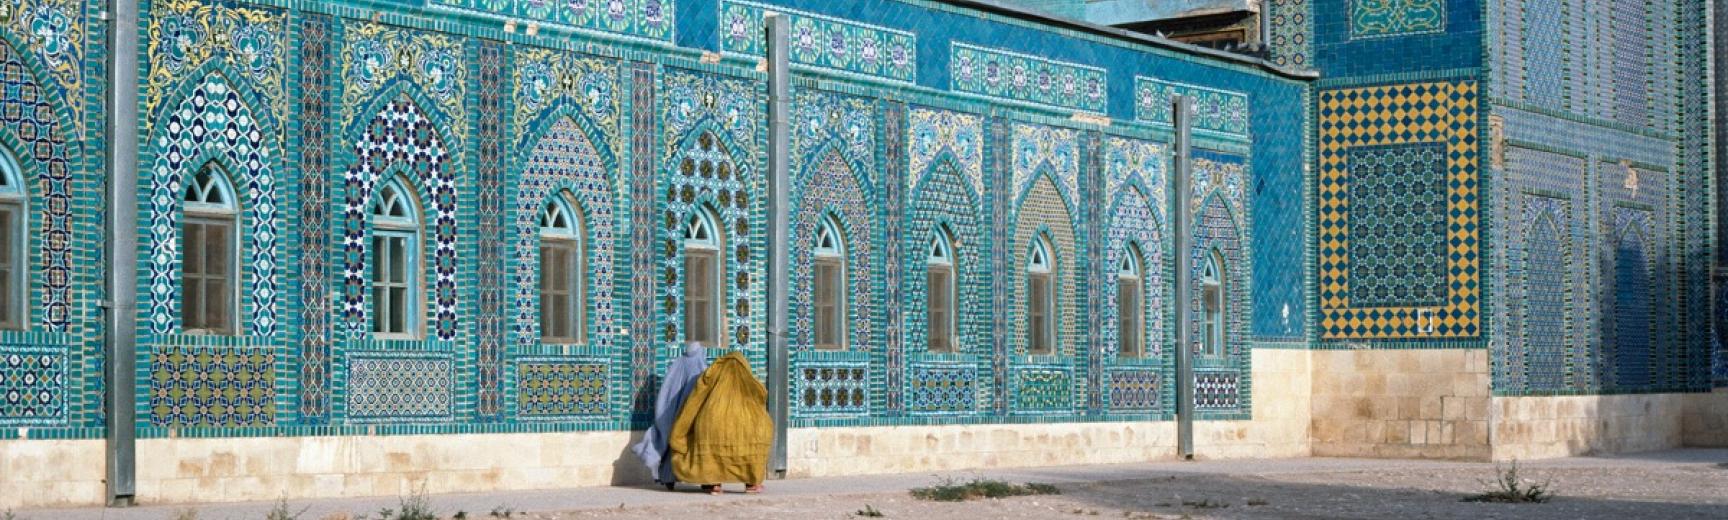 Two women in burqas walking near a brightly decorated blue mosque